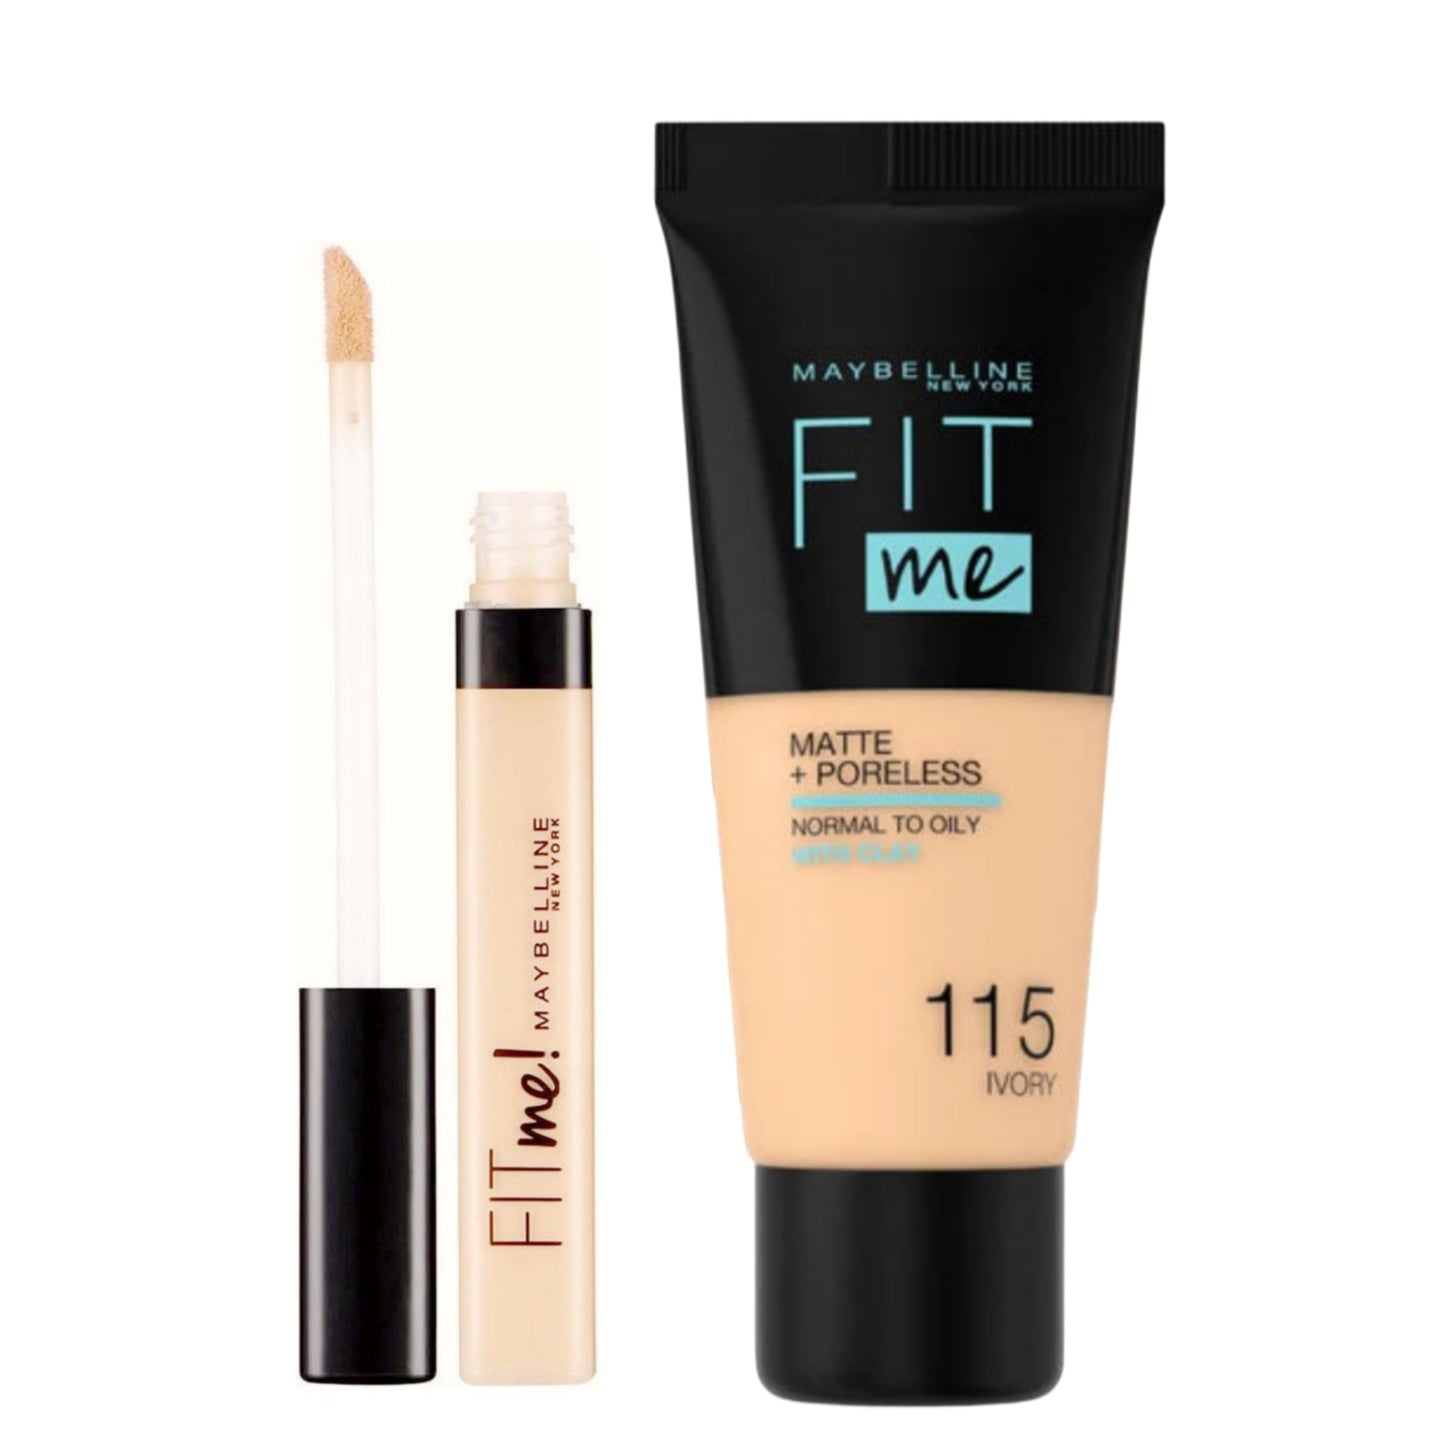 Buy 1 Get 1 Free Offer "2 pieces"  Fitme Foundation & Fitme Concealer